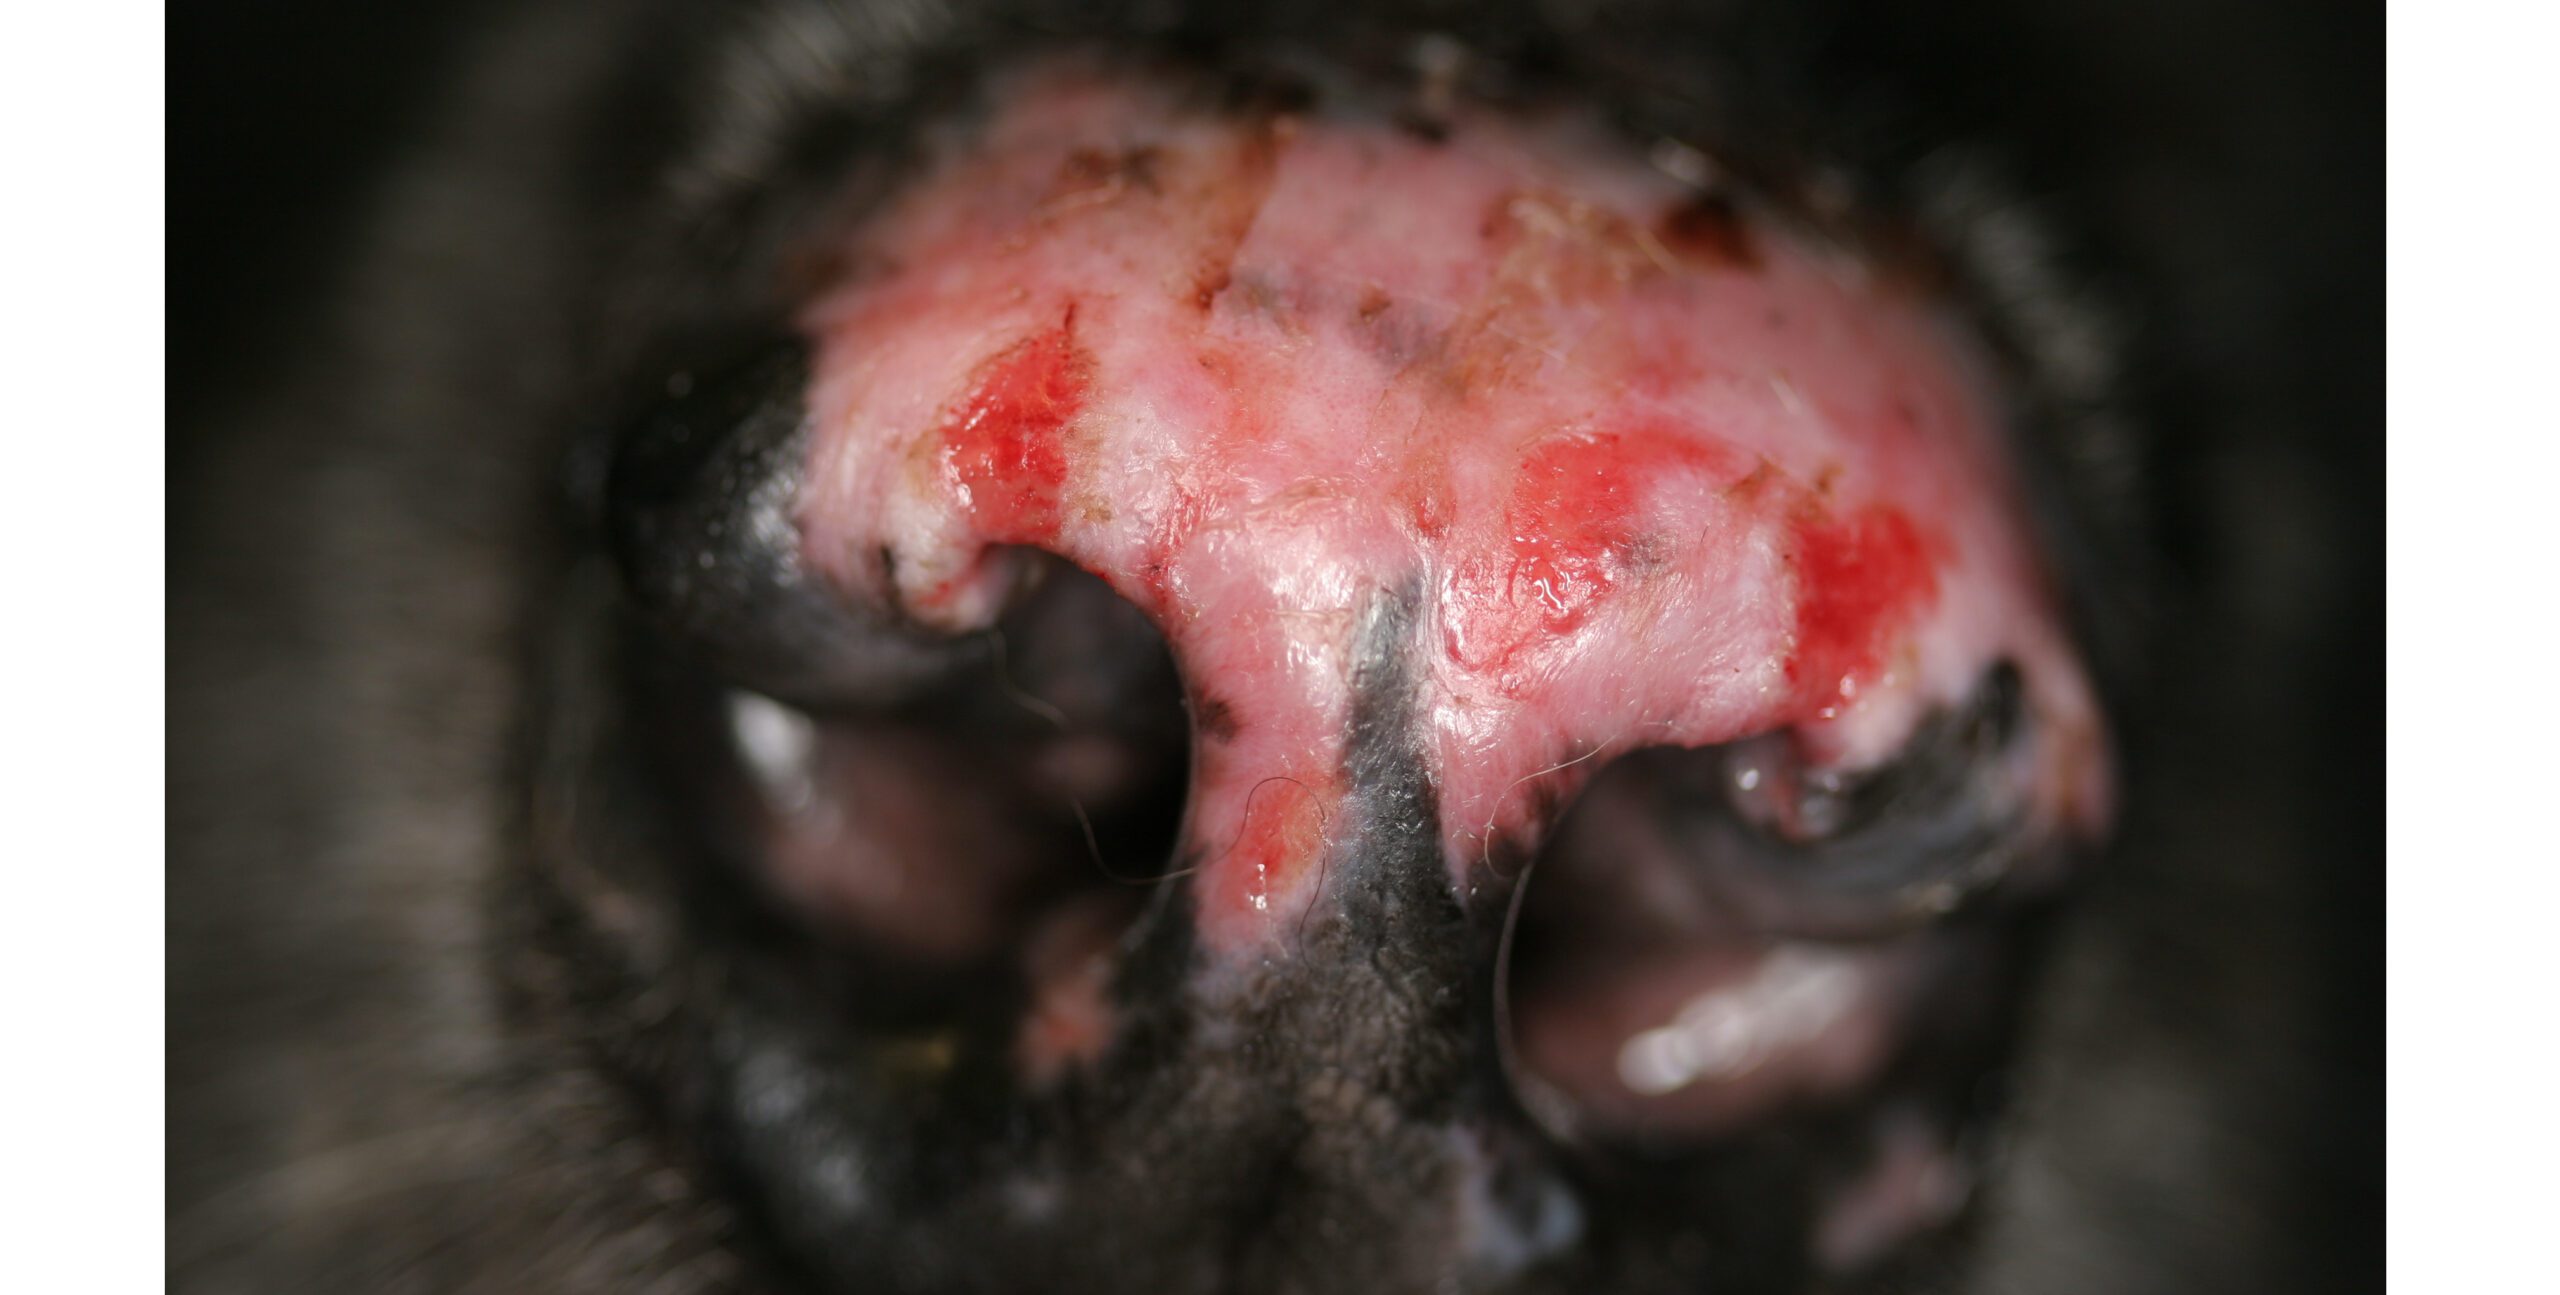 Canine Cutaneous Lupus Erythematosus: Nasal depigmentation, Erosions & Loss of Surface Architecture